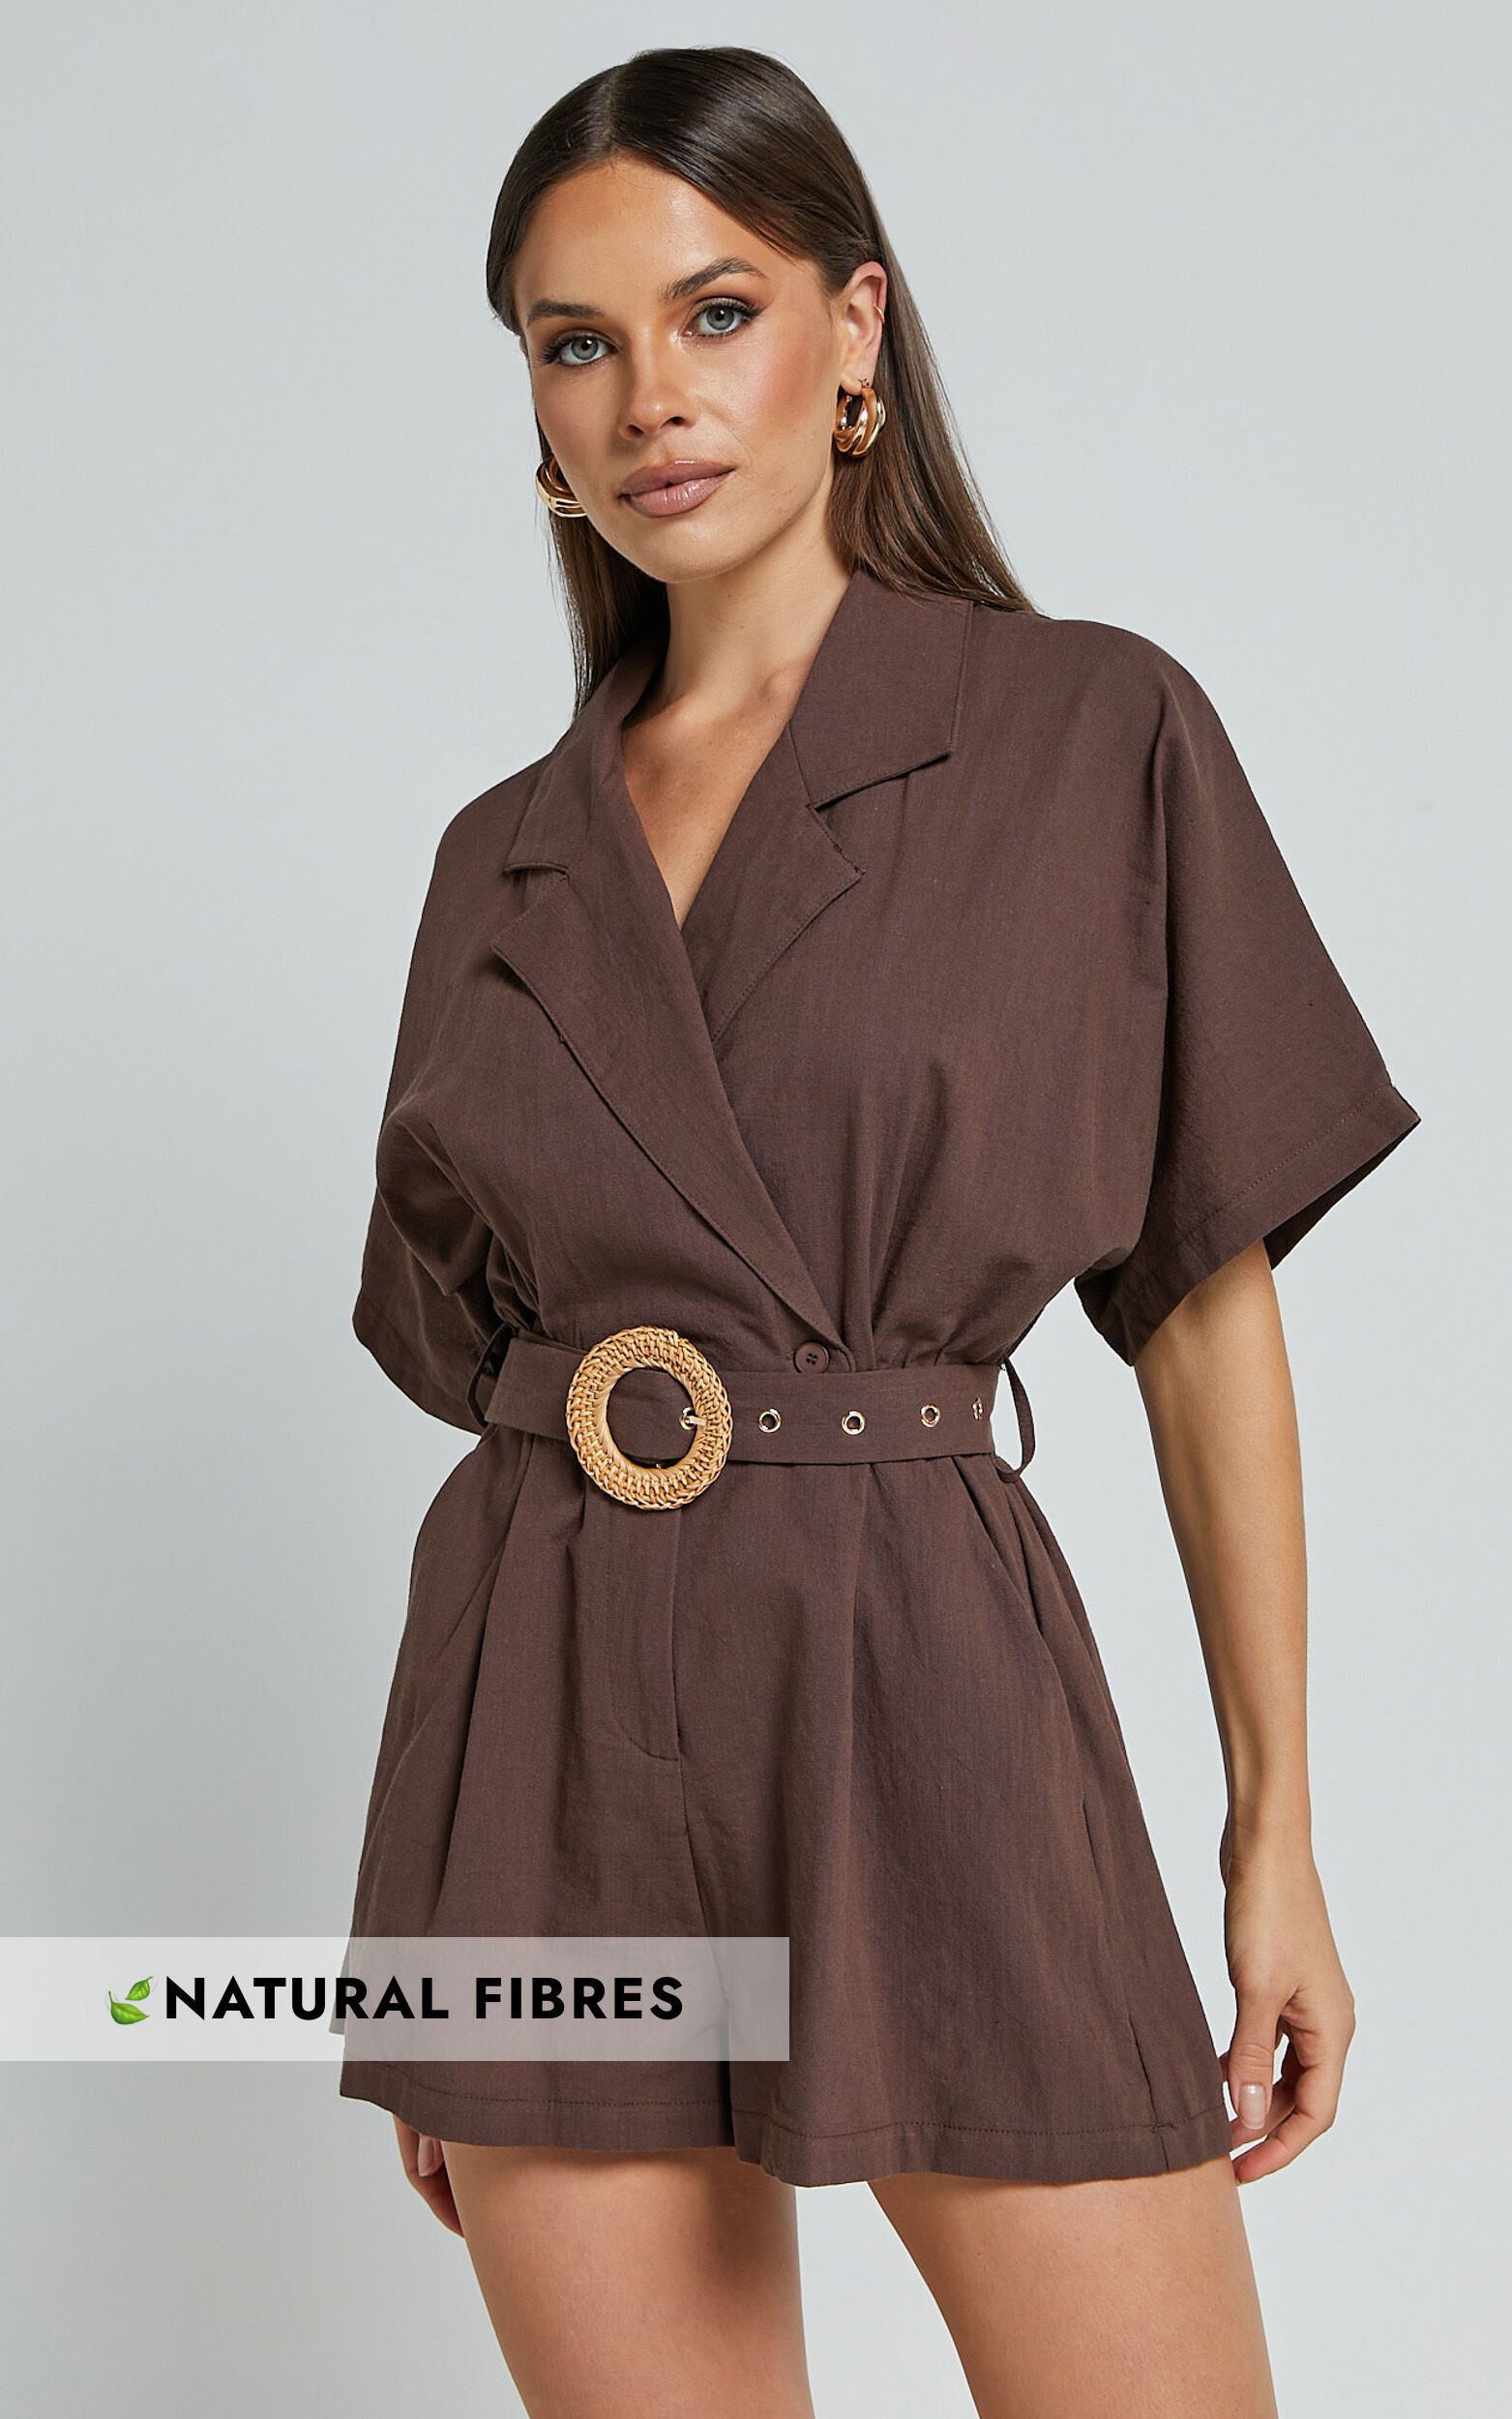 Thaisa Playsuit - Short Sleeve Collared Belted Playsuit in Choc - 06, BRN1